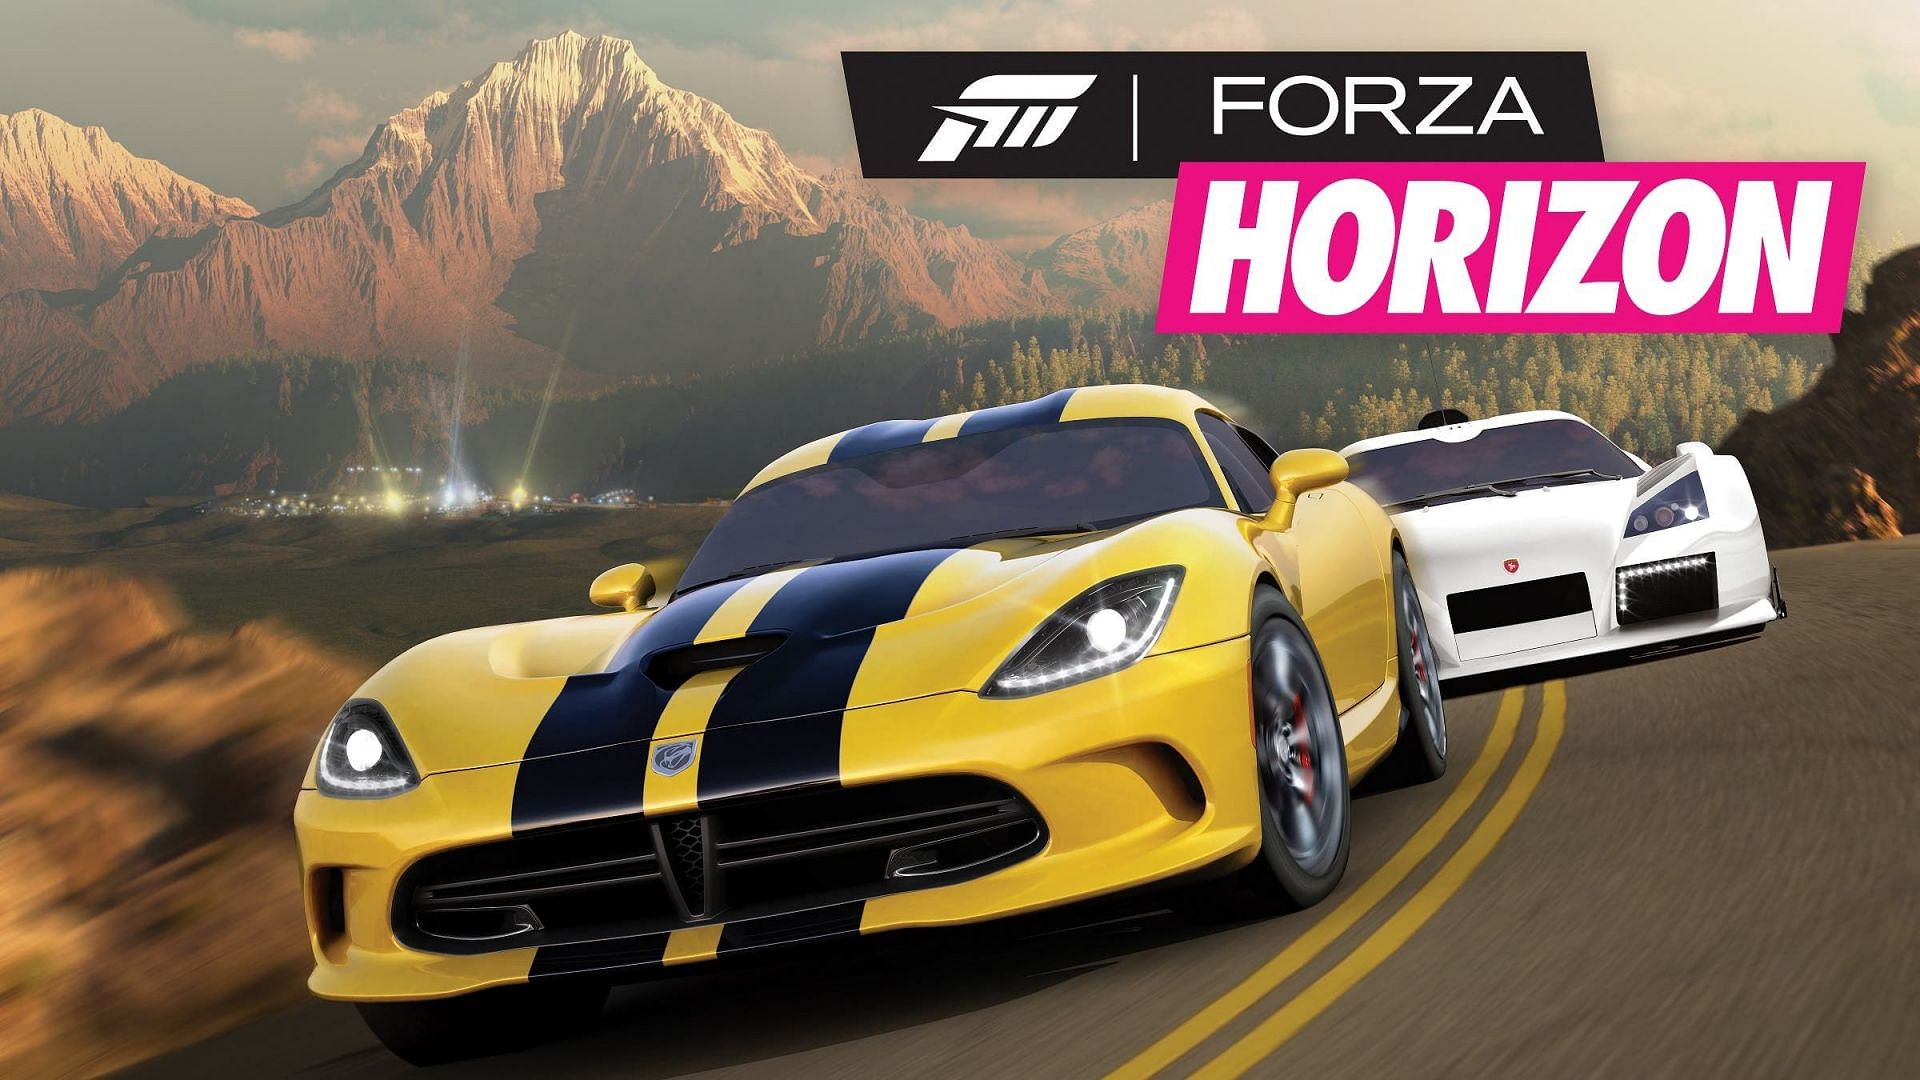 Forza Horizon took the franchise in a whole new direction (Image via Playground Games)